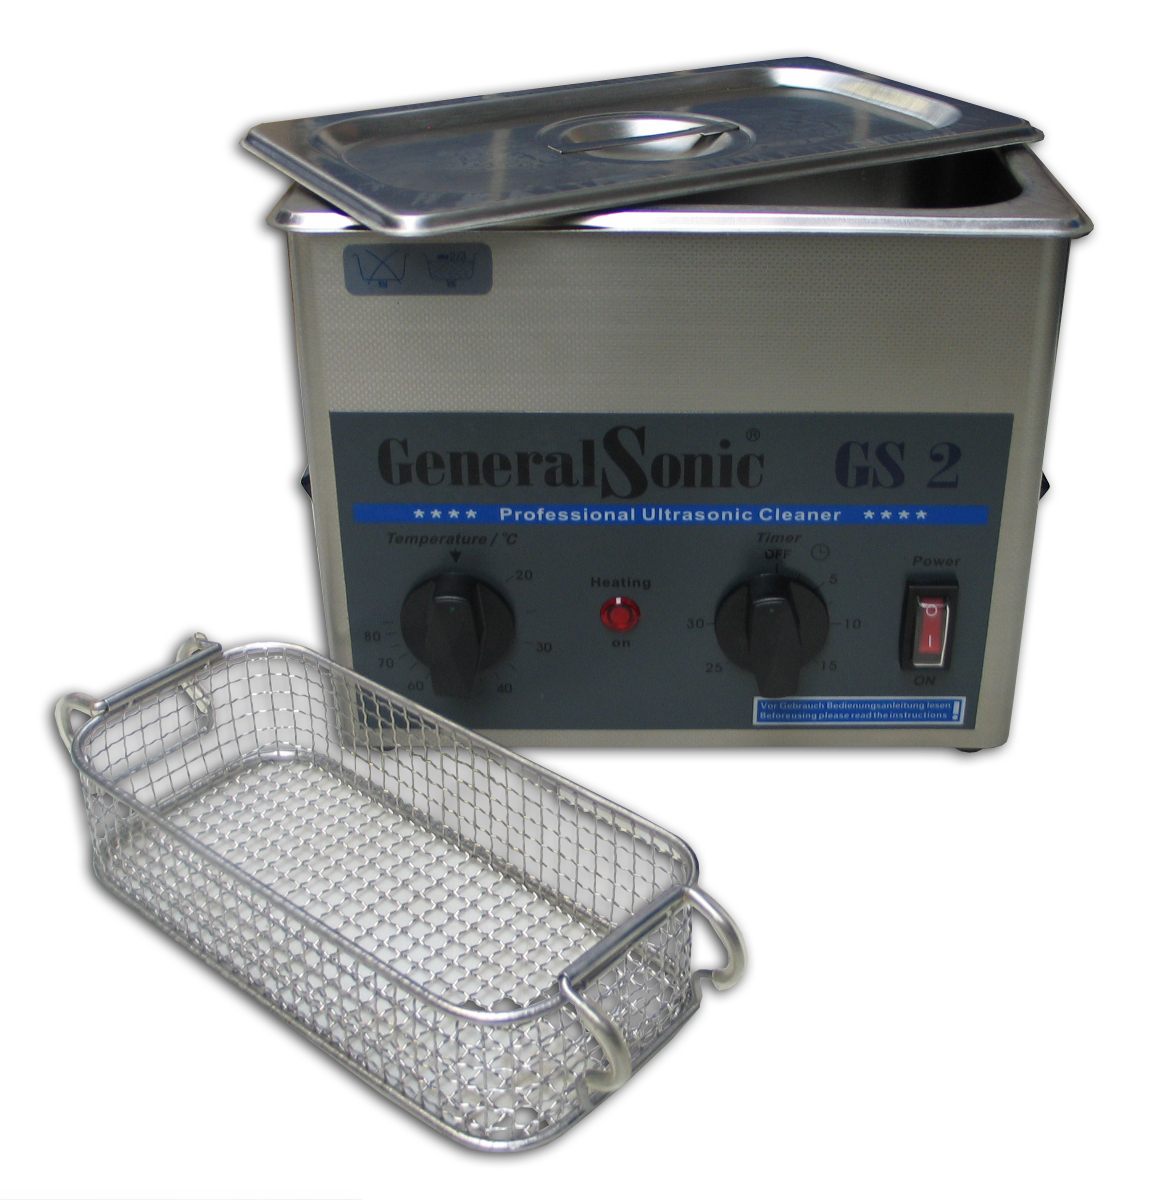 TOP OFFER: General Sonic 2 liter ultrasound machine - with basket and lid